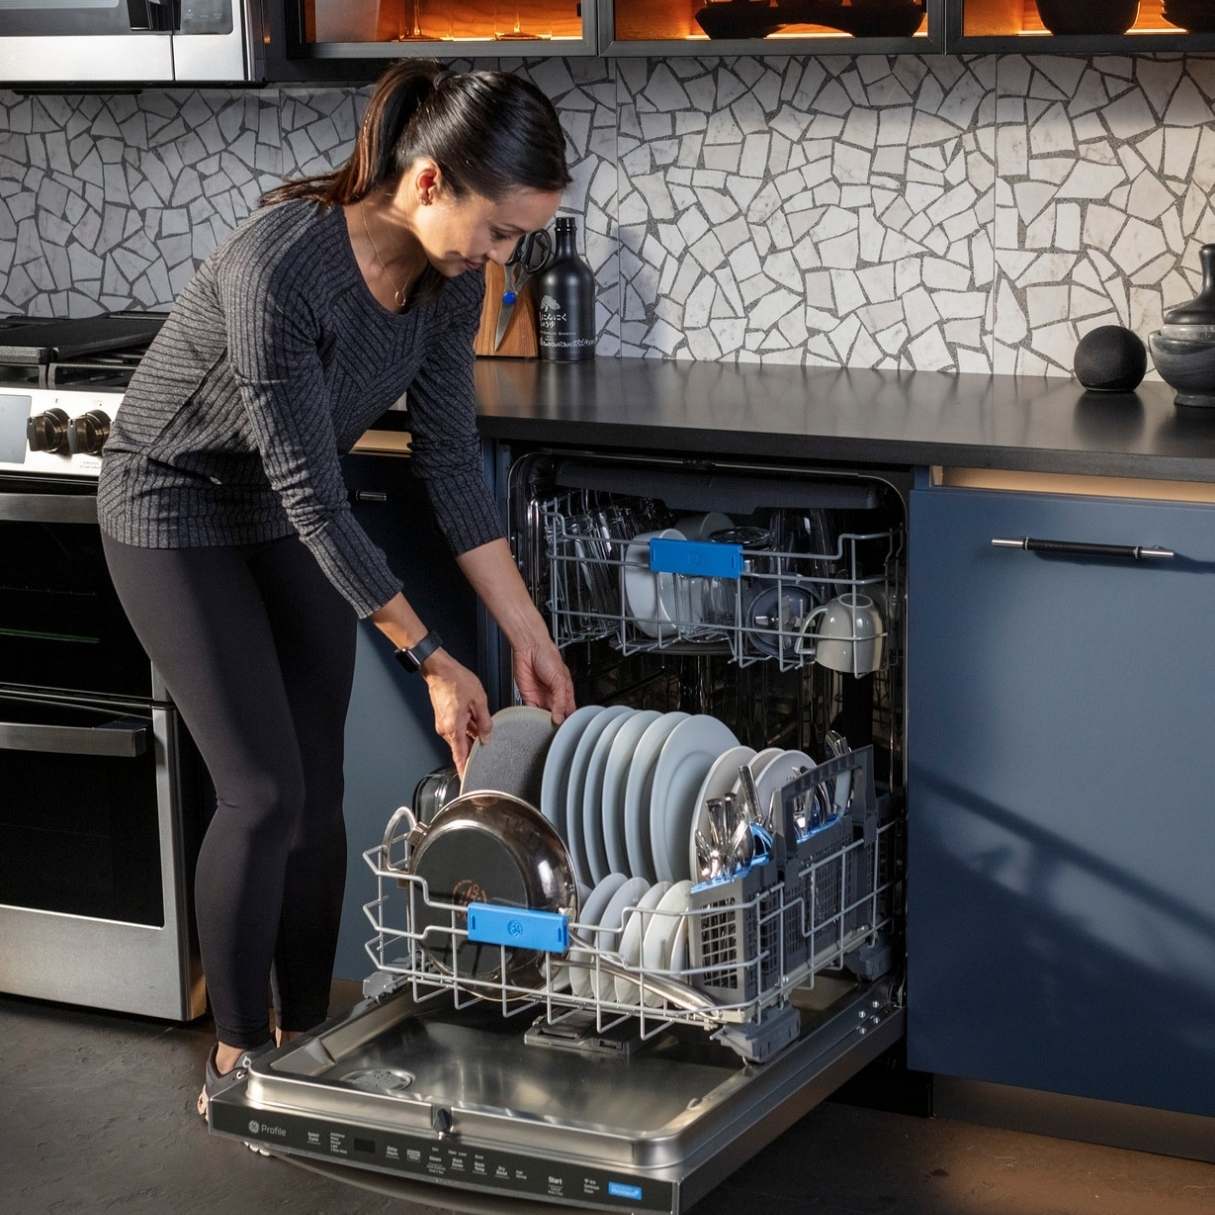 How To Fix The Error Code PF For GE Dishwasher